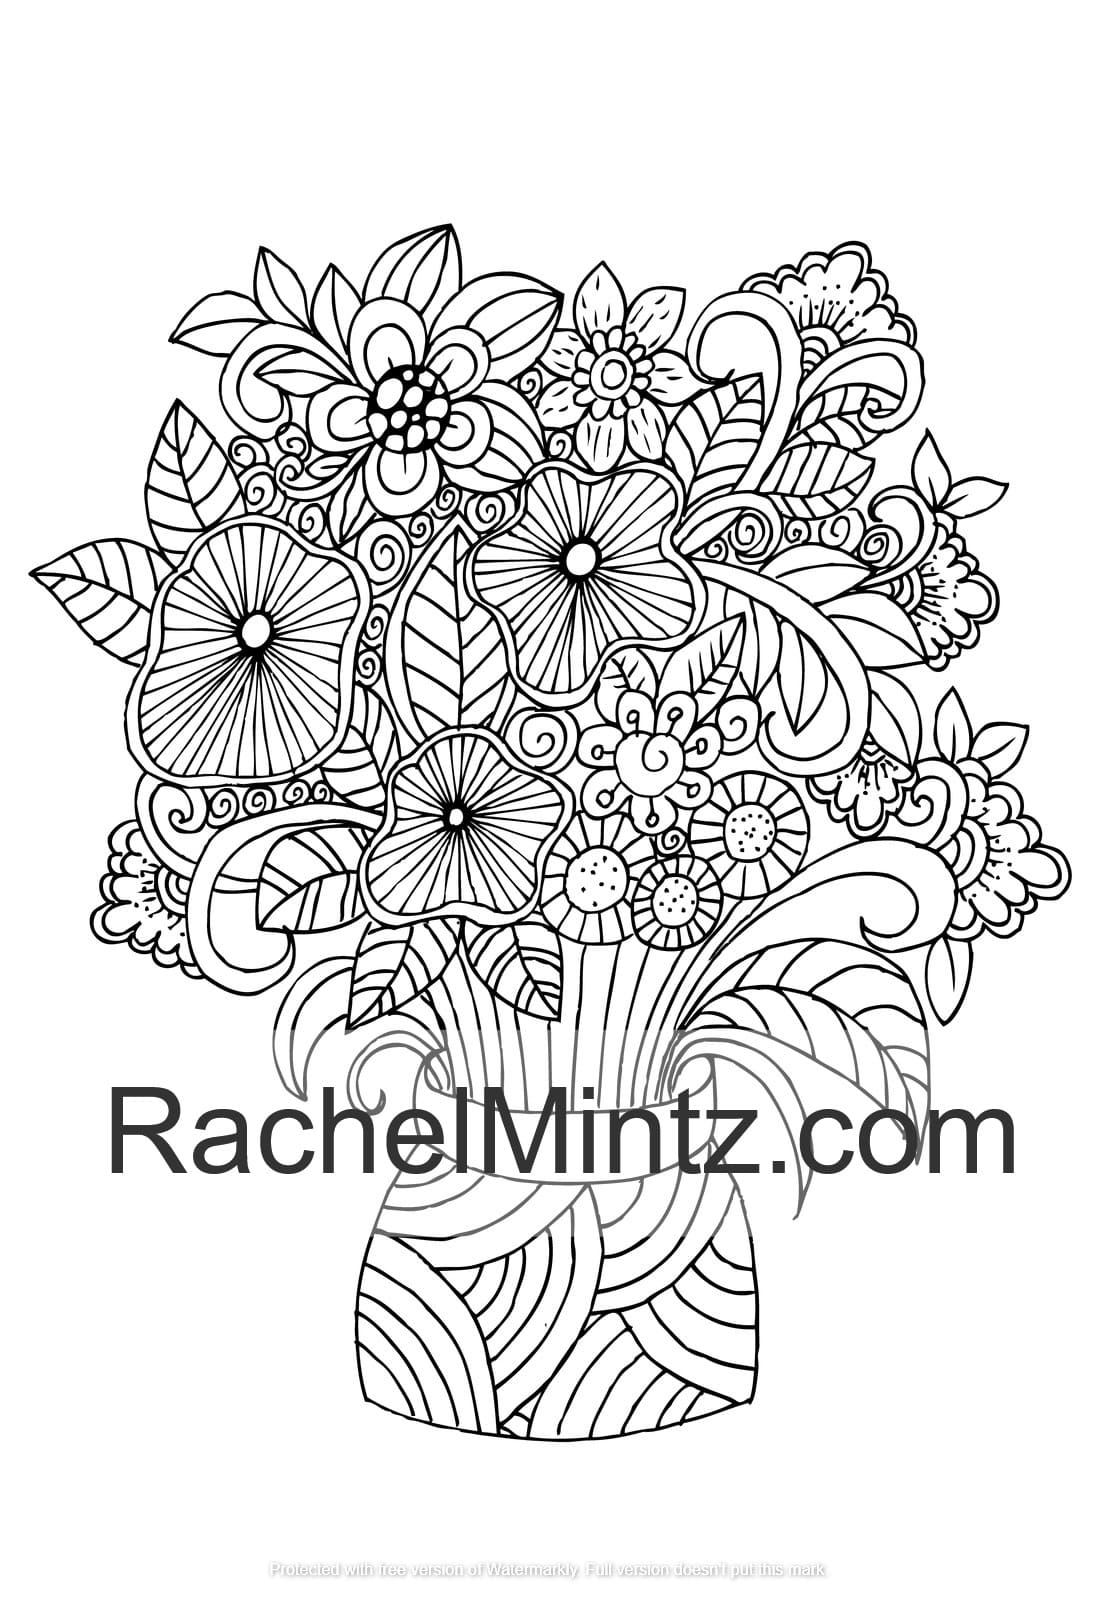 My flowers bouquet coloring book